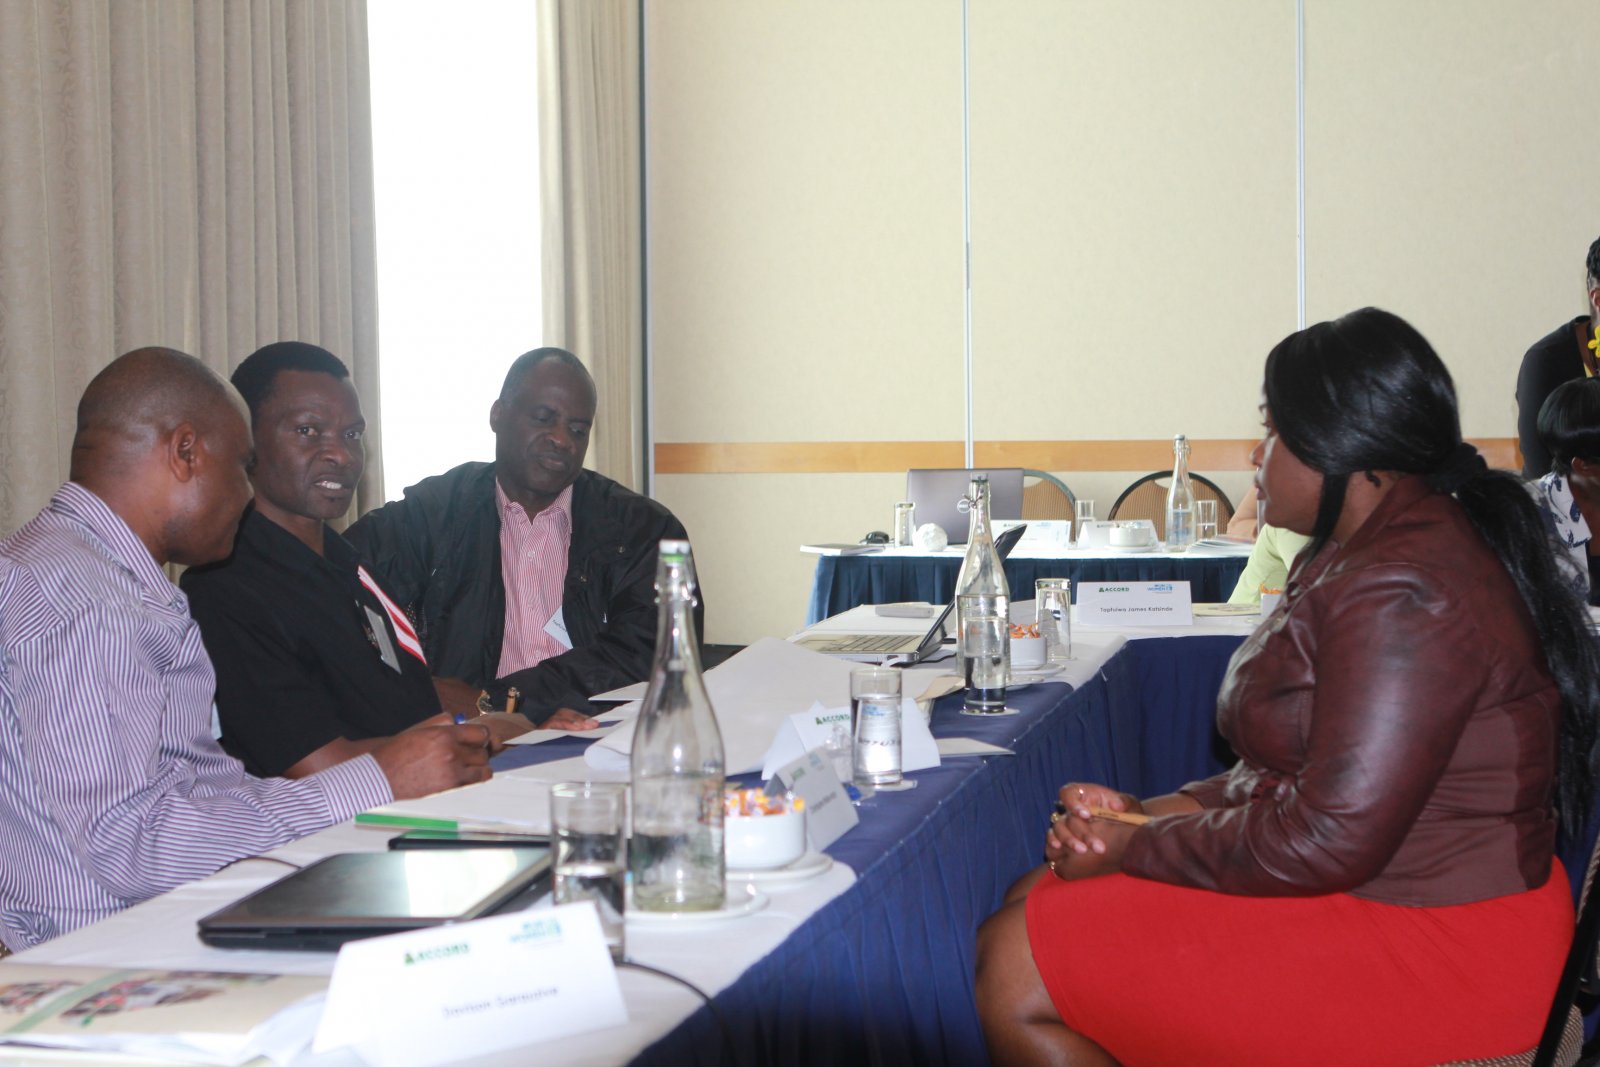 Daisy Mbuto, Accord Intern chats with participants from Zimbabwe